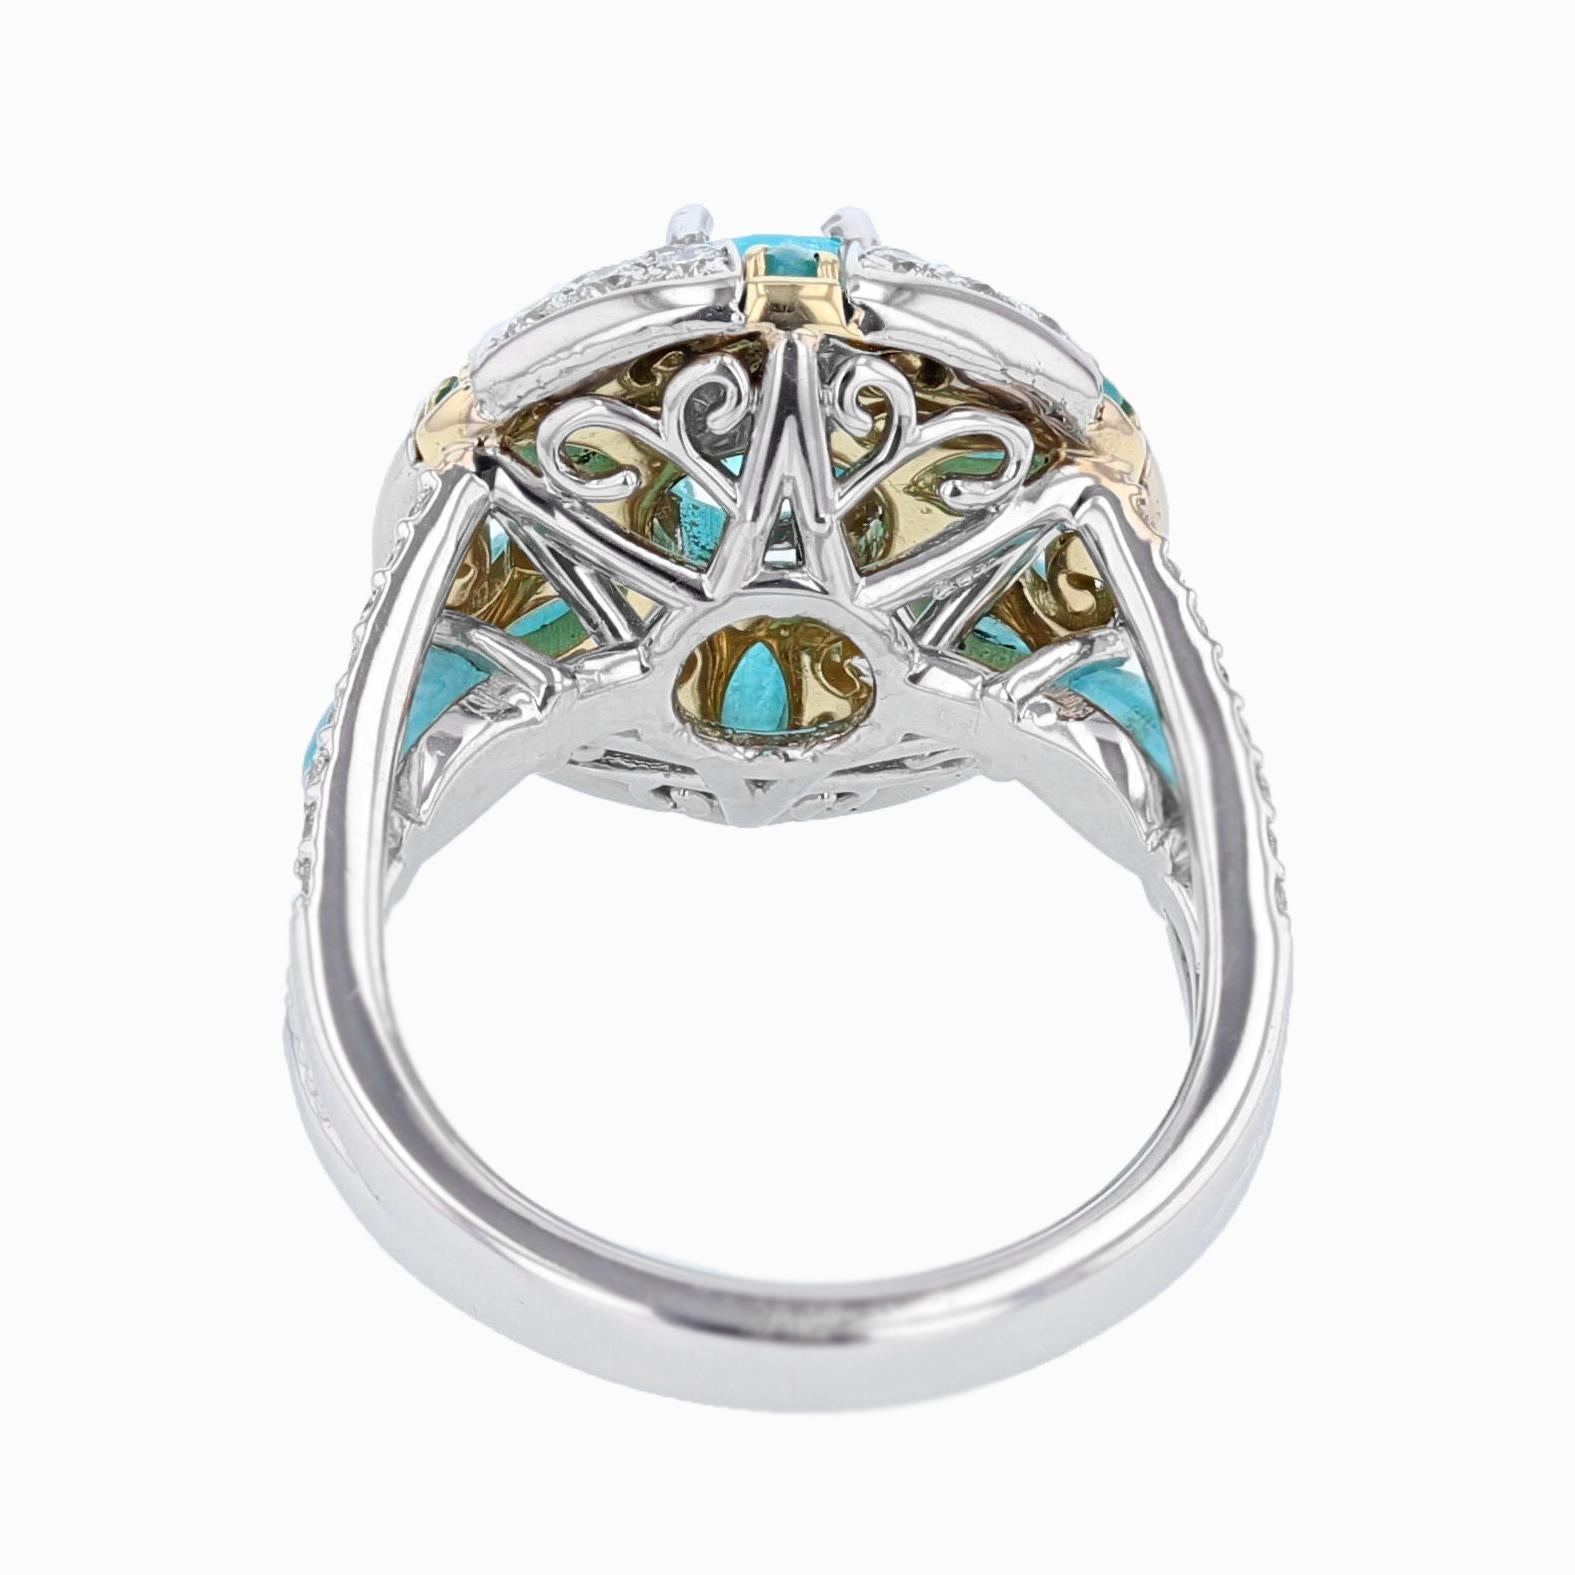 Nazarelle 18K W/Y Gold GIA Brazilian 1.41ct Paraiba Tourmaline and Diamond Ring In New Condition For Sale In Houston, TX